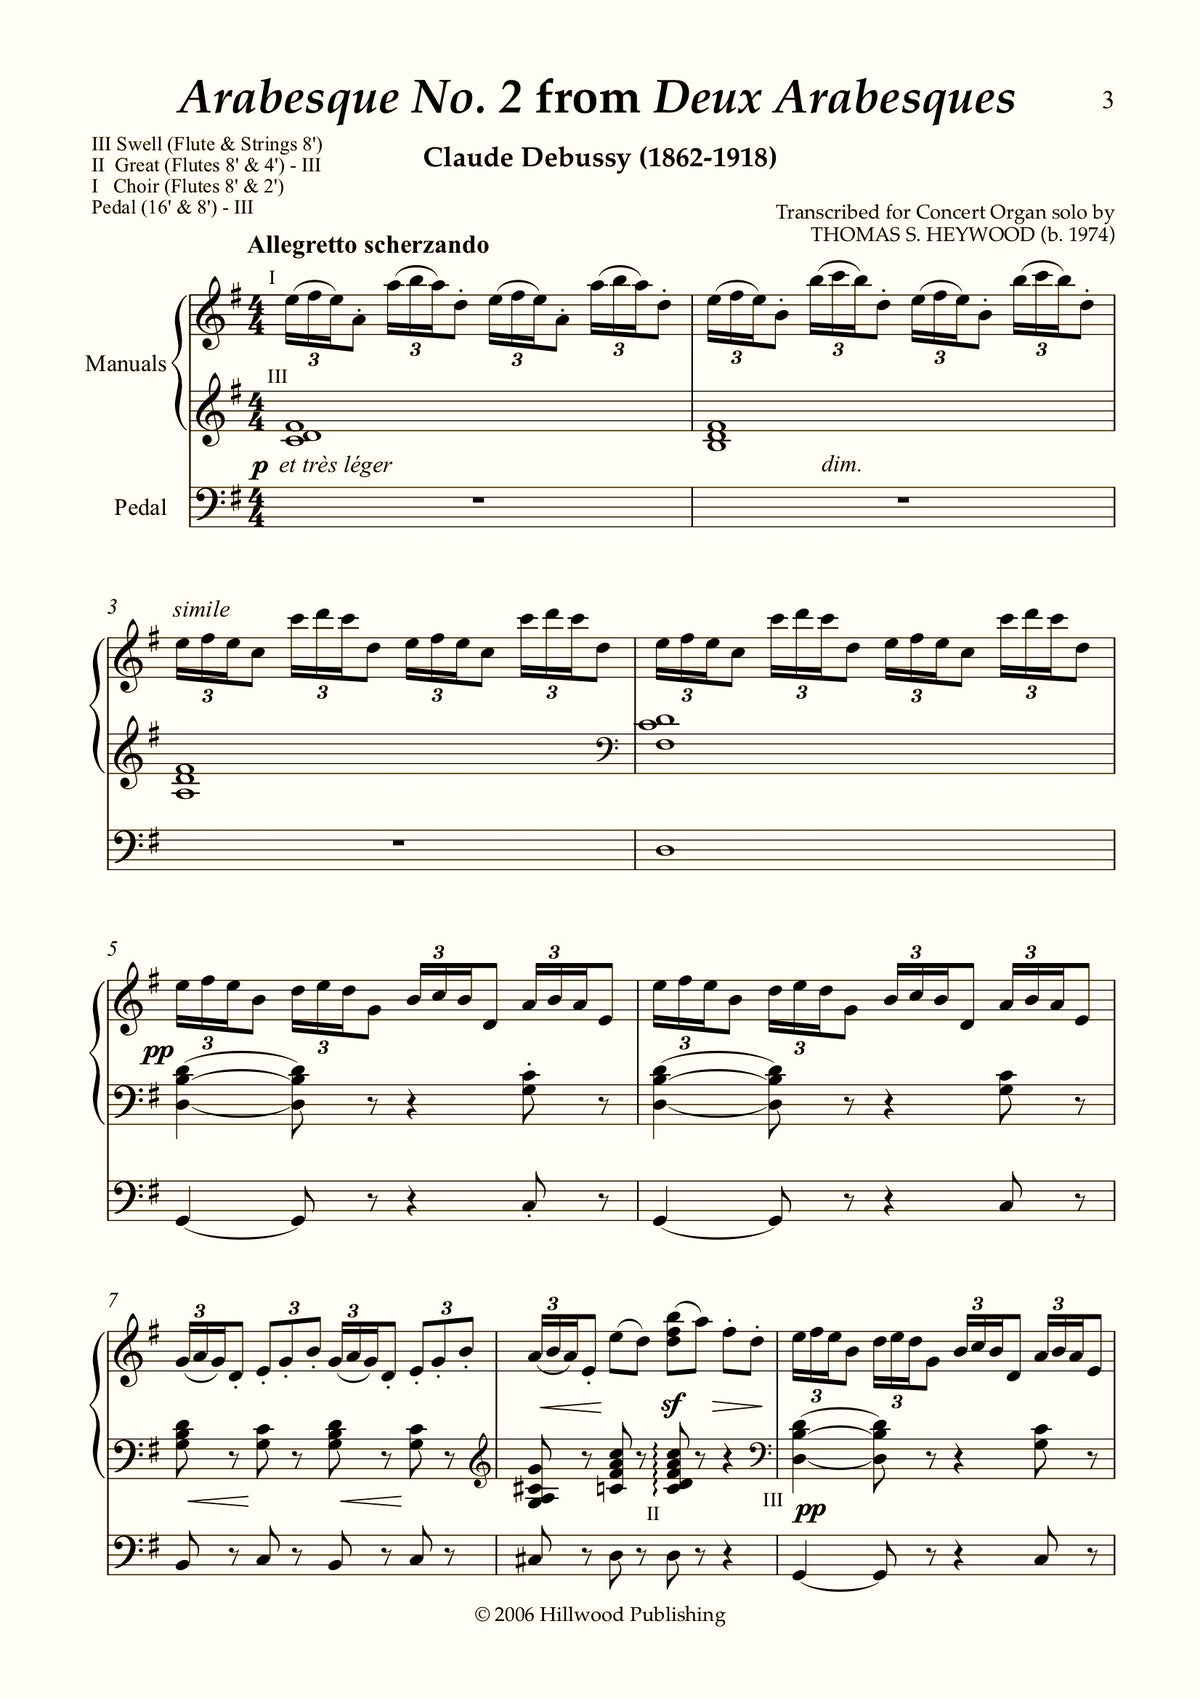 Debussy/Heywood - Arabesque No. 2 in G from Deux Arabesques (Score) - Concert Organ International